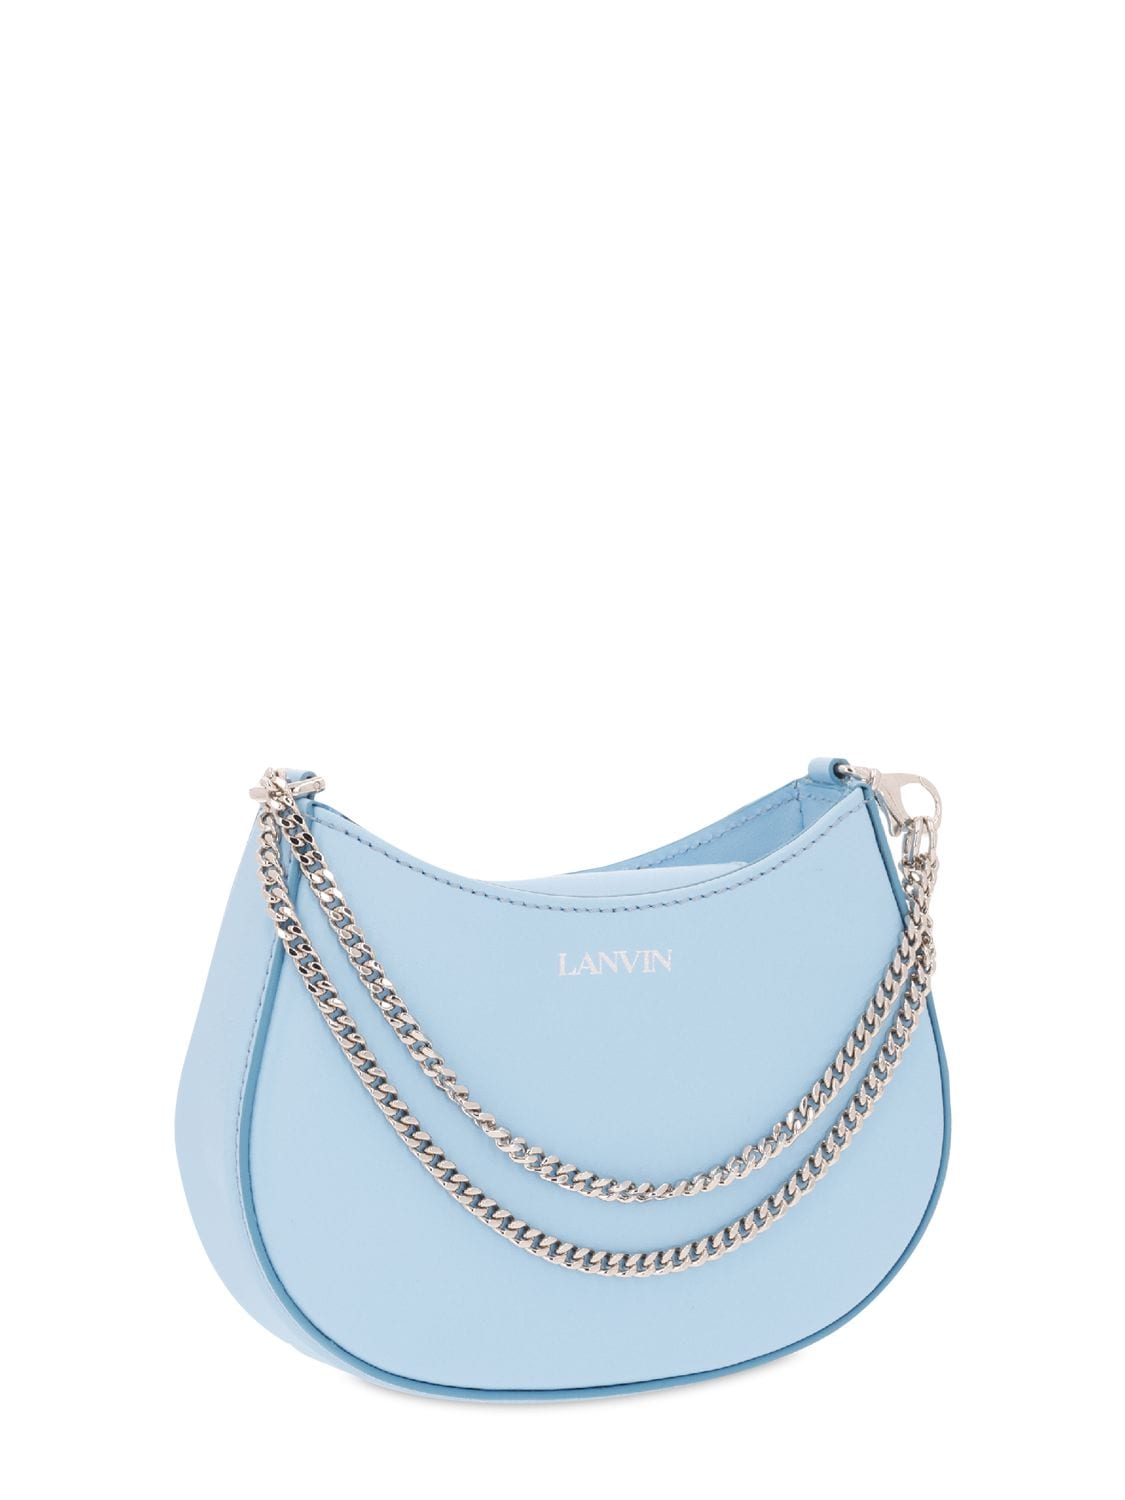 Lanvin Extra Nano Hobo Leather Top Handle Bag In Sky Blue